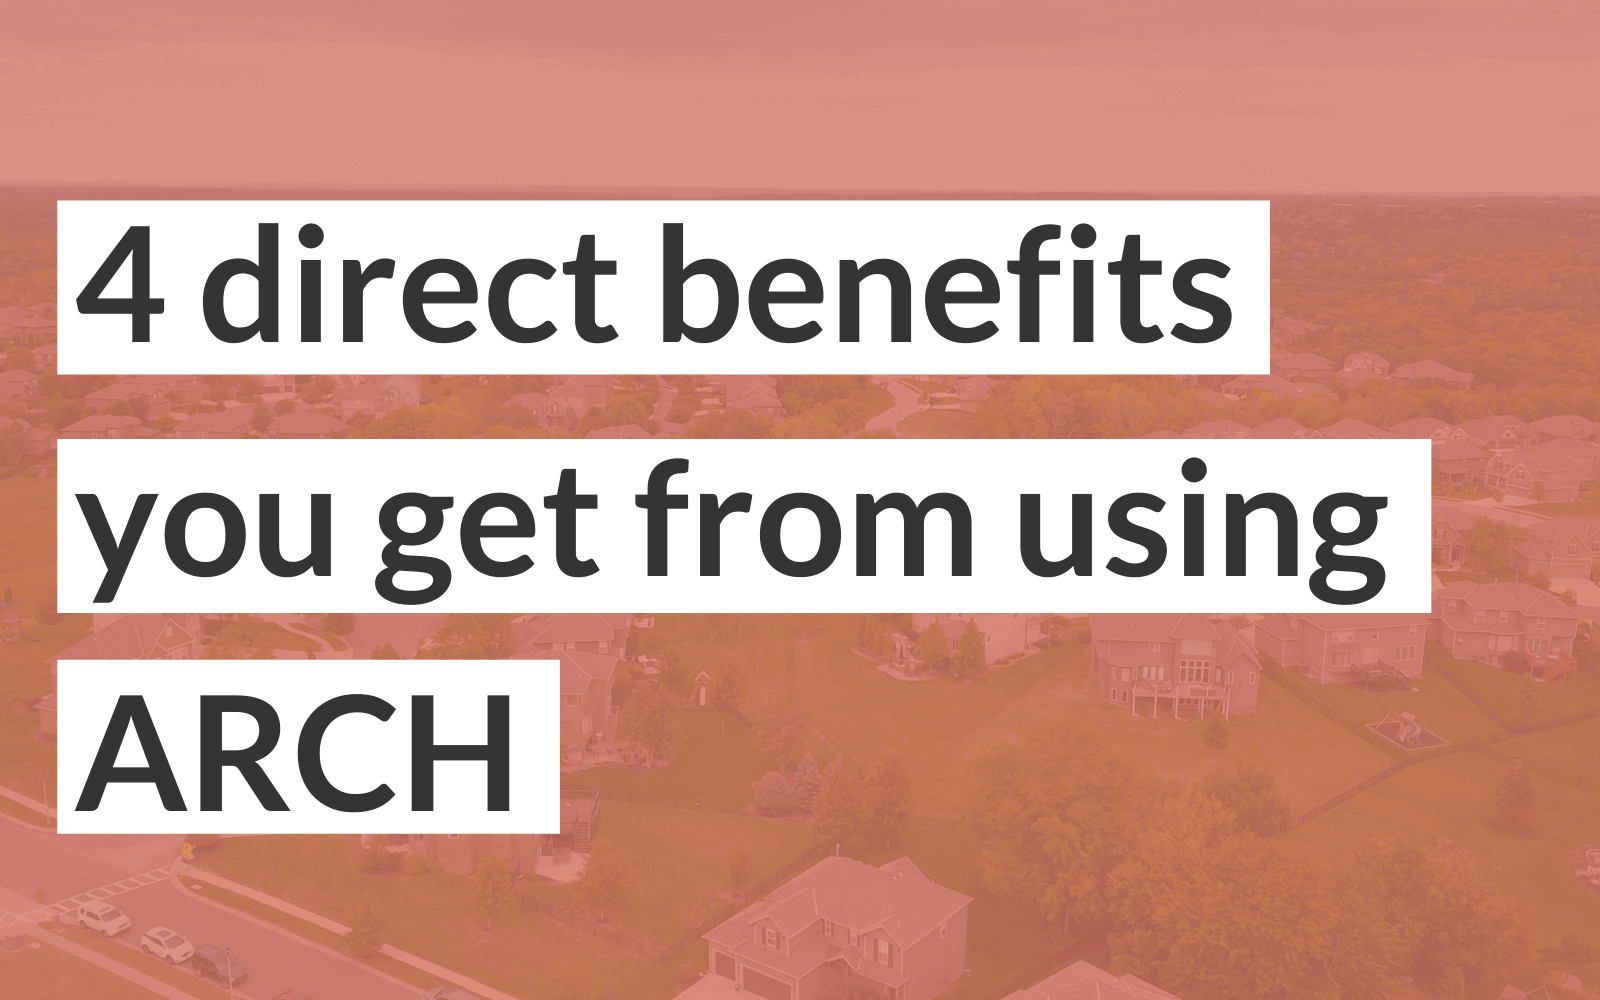 4 direct benefits you gain from using ARCH for the down payment on your first home